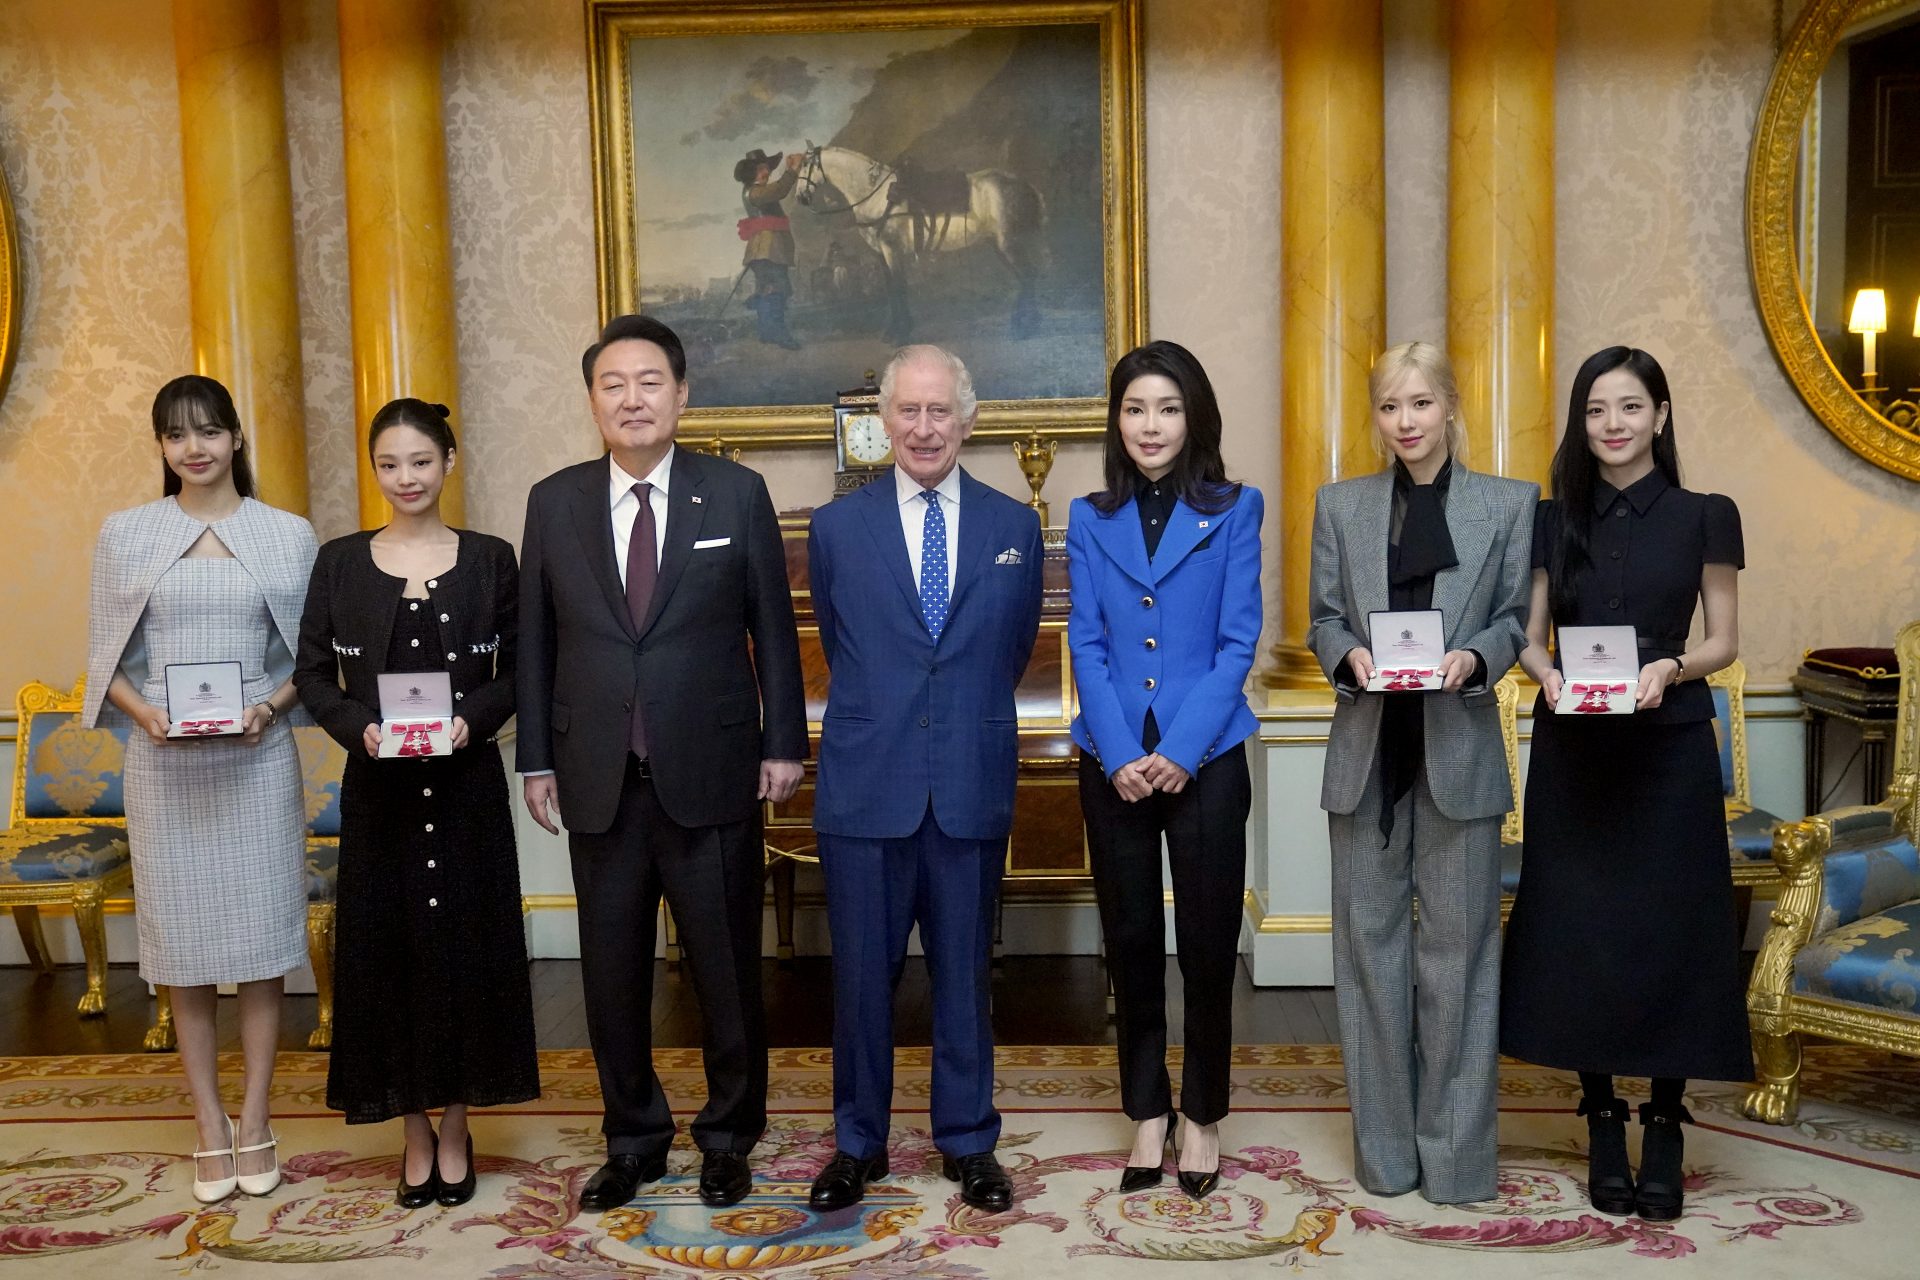 Blackpink face to face with British royalty in Buckingham Palace